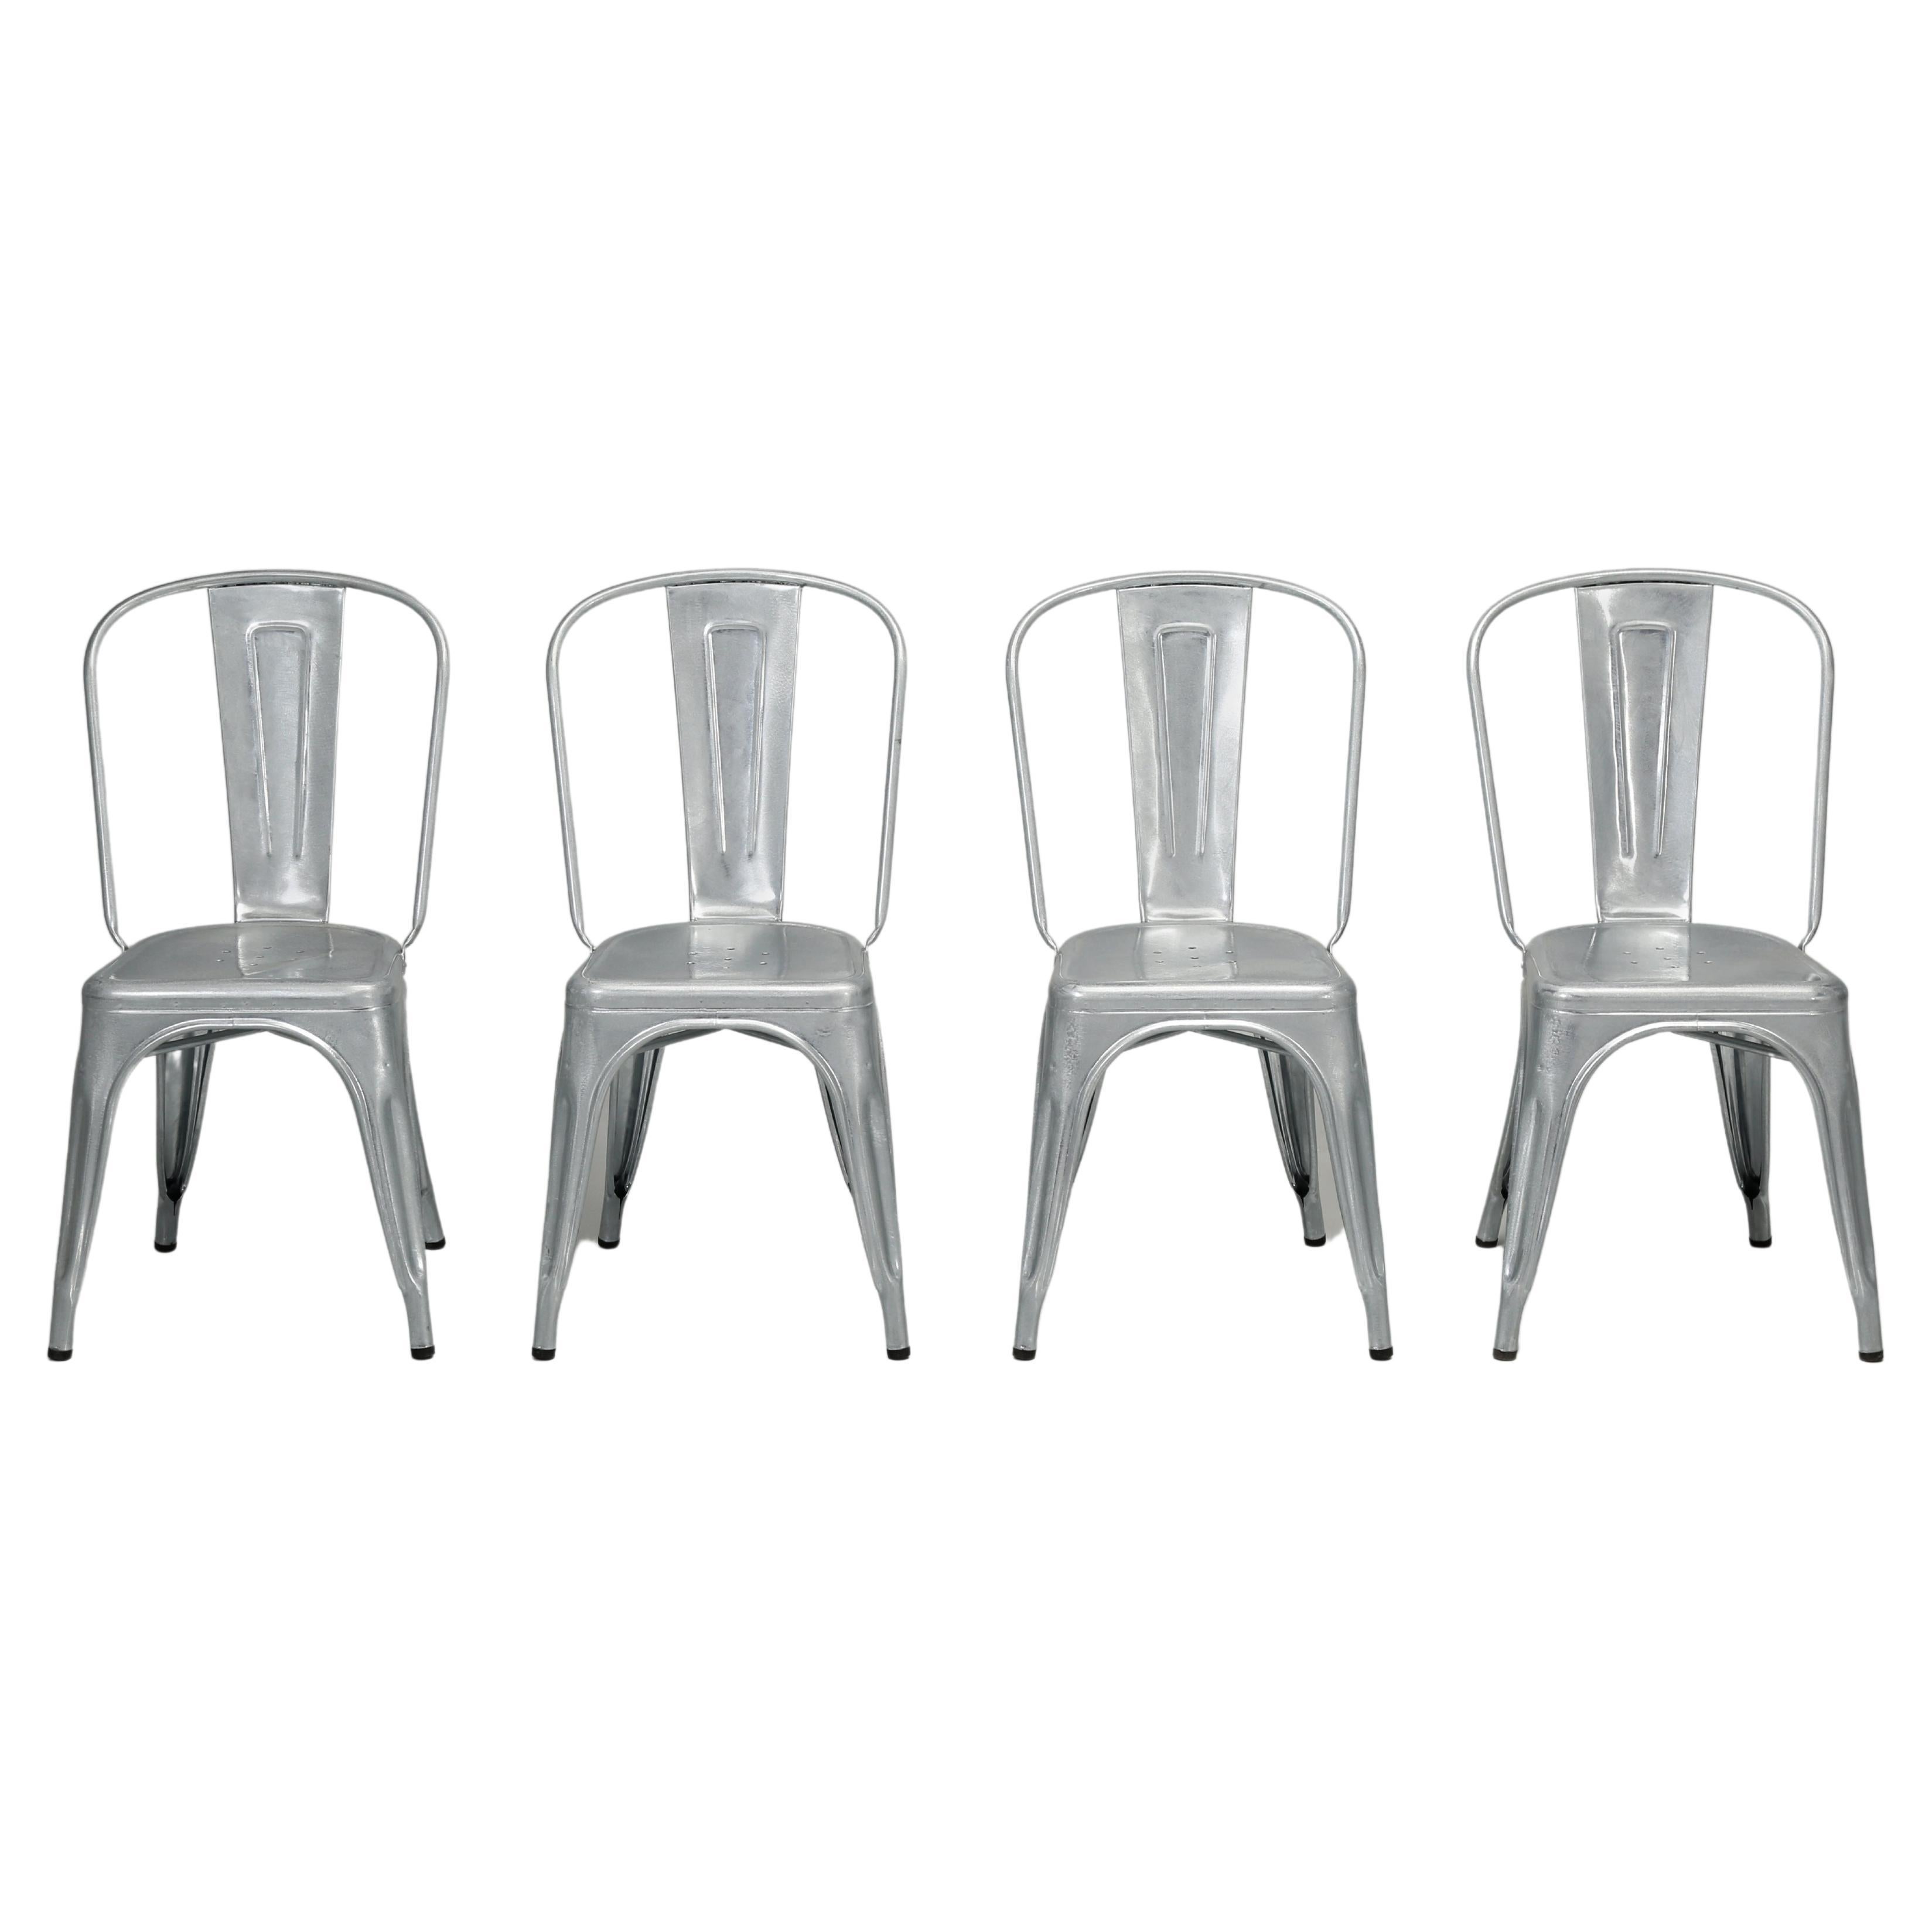 Genuine French Tolix Steel Stacking Chairs Set 4 Galvanized with a Clear-Coat